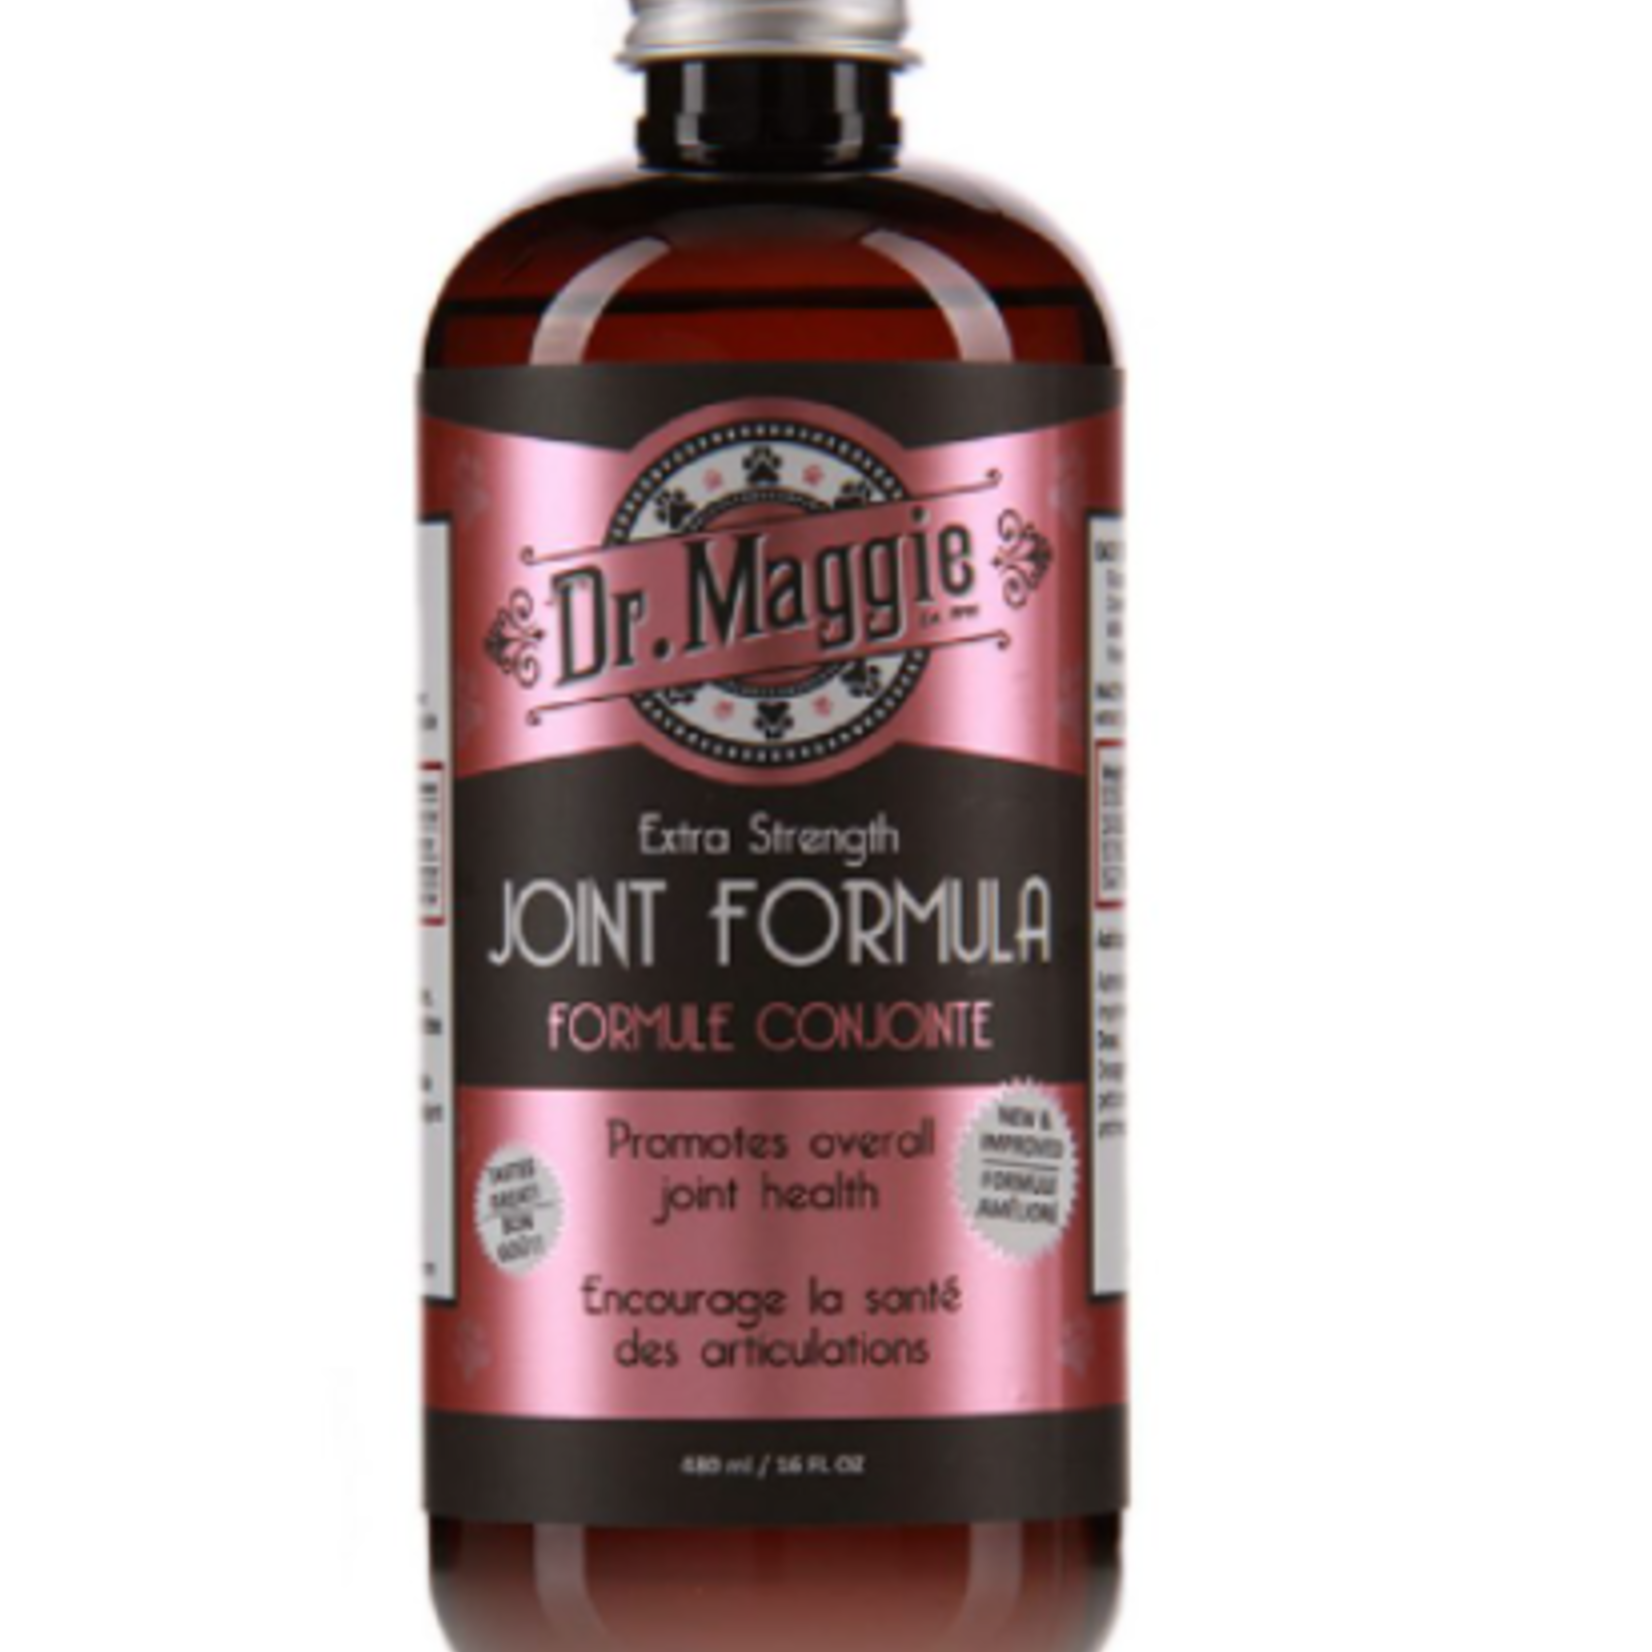 NaturPet Joint Formula-240ml--Glucosamine for Dogs & Cats